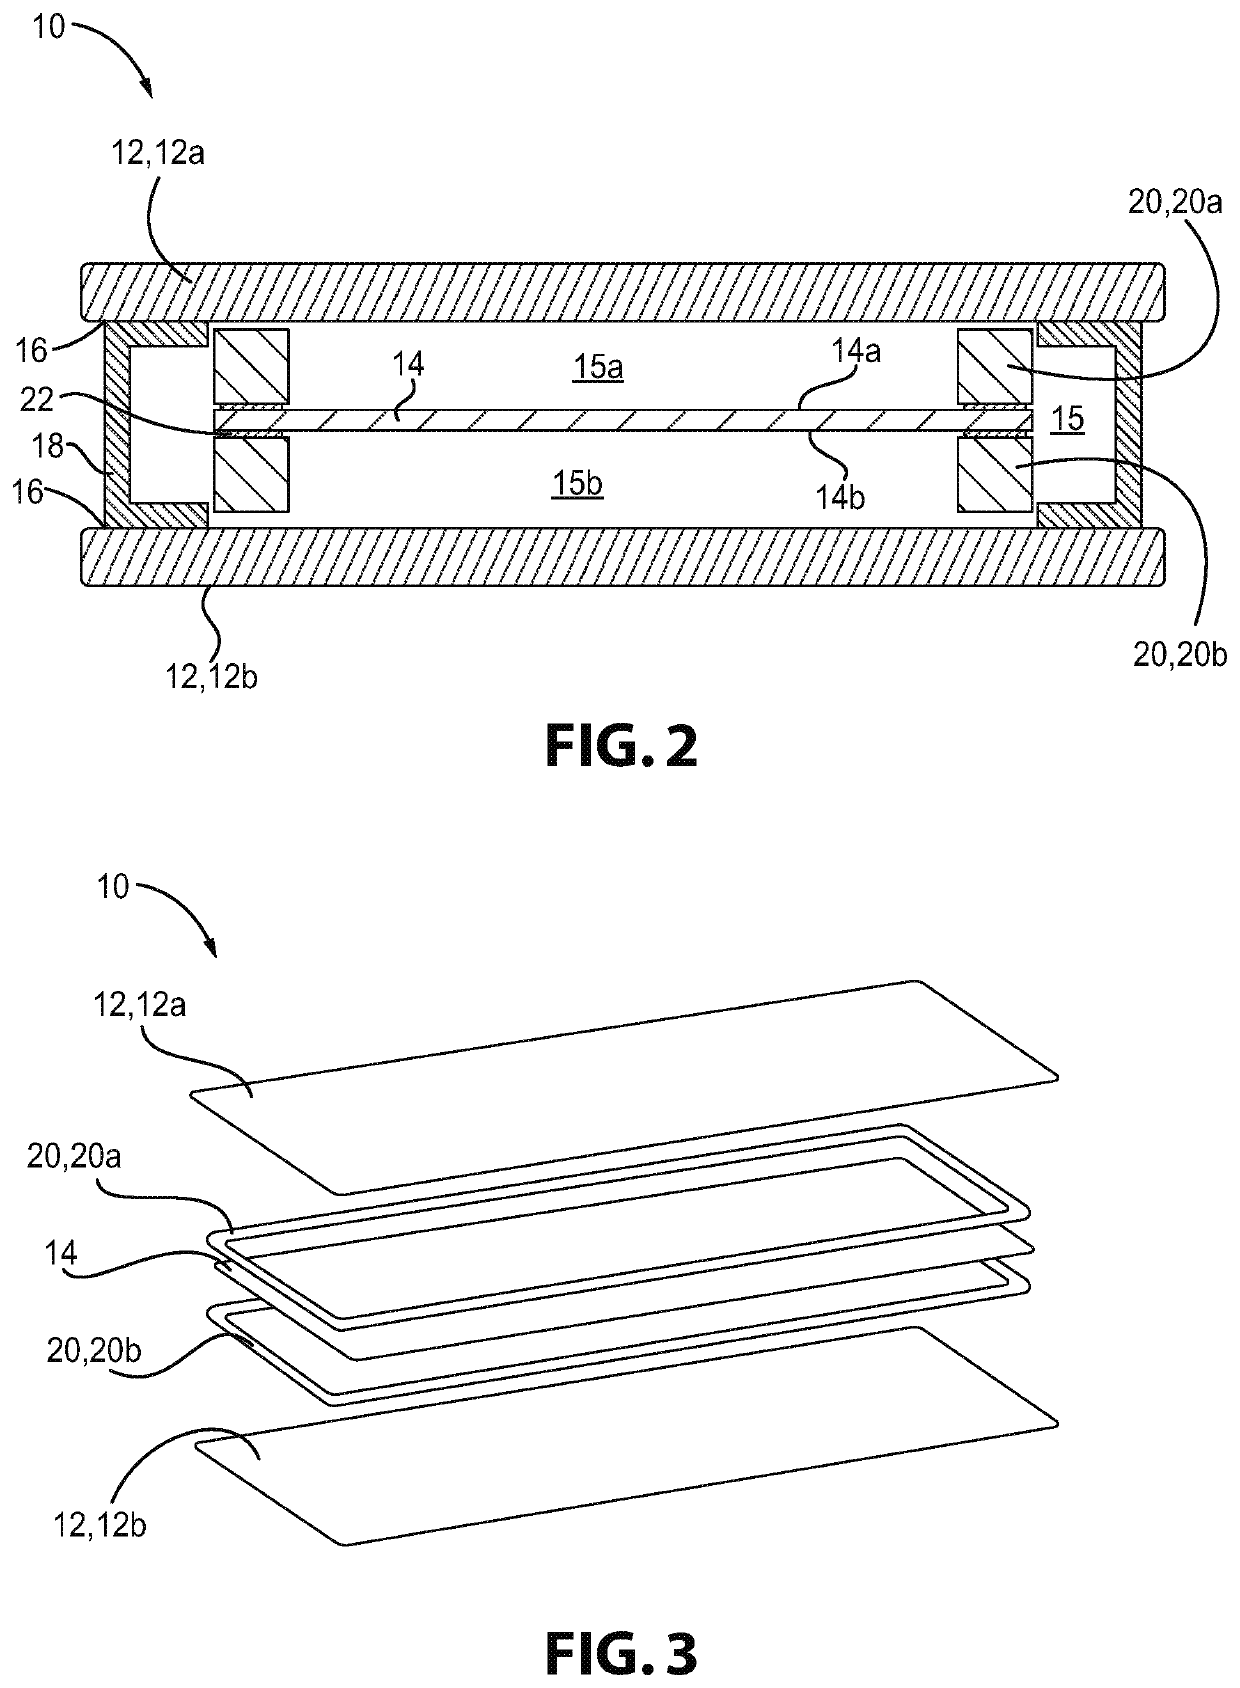 Multi-Pane Insulating Glass Unit Having a Rigid Frame for a Third Pane and Method of Making the Same